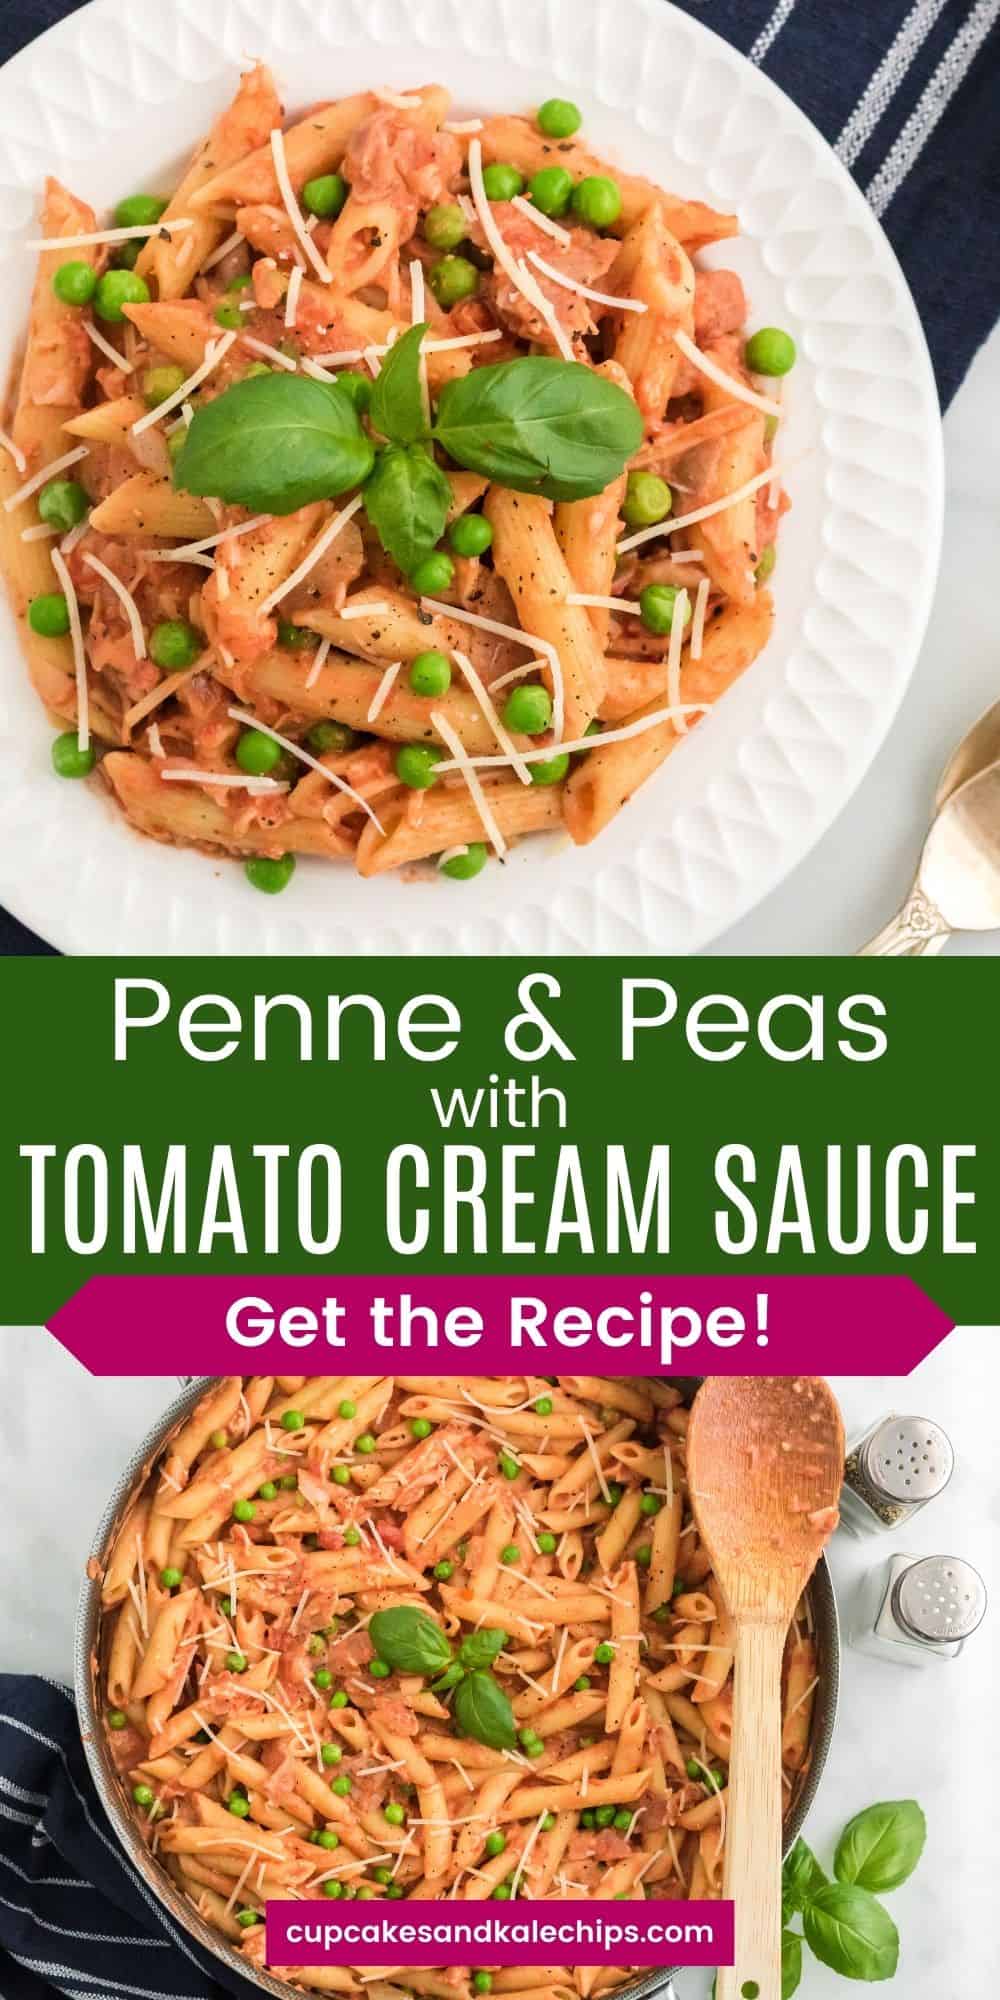 Penne with Tomato Cream Sauce | Cupcakes & Kale Chips